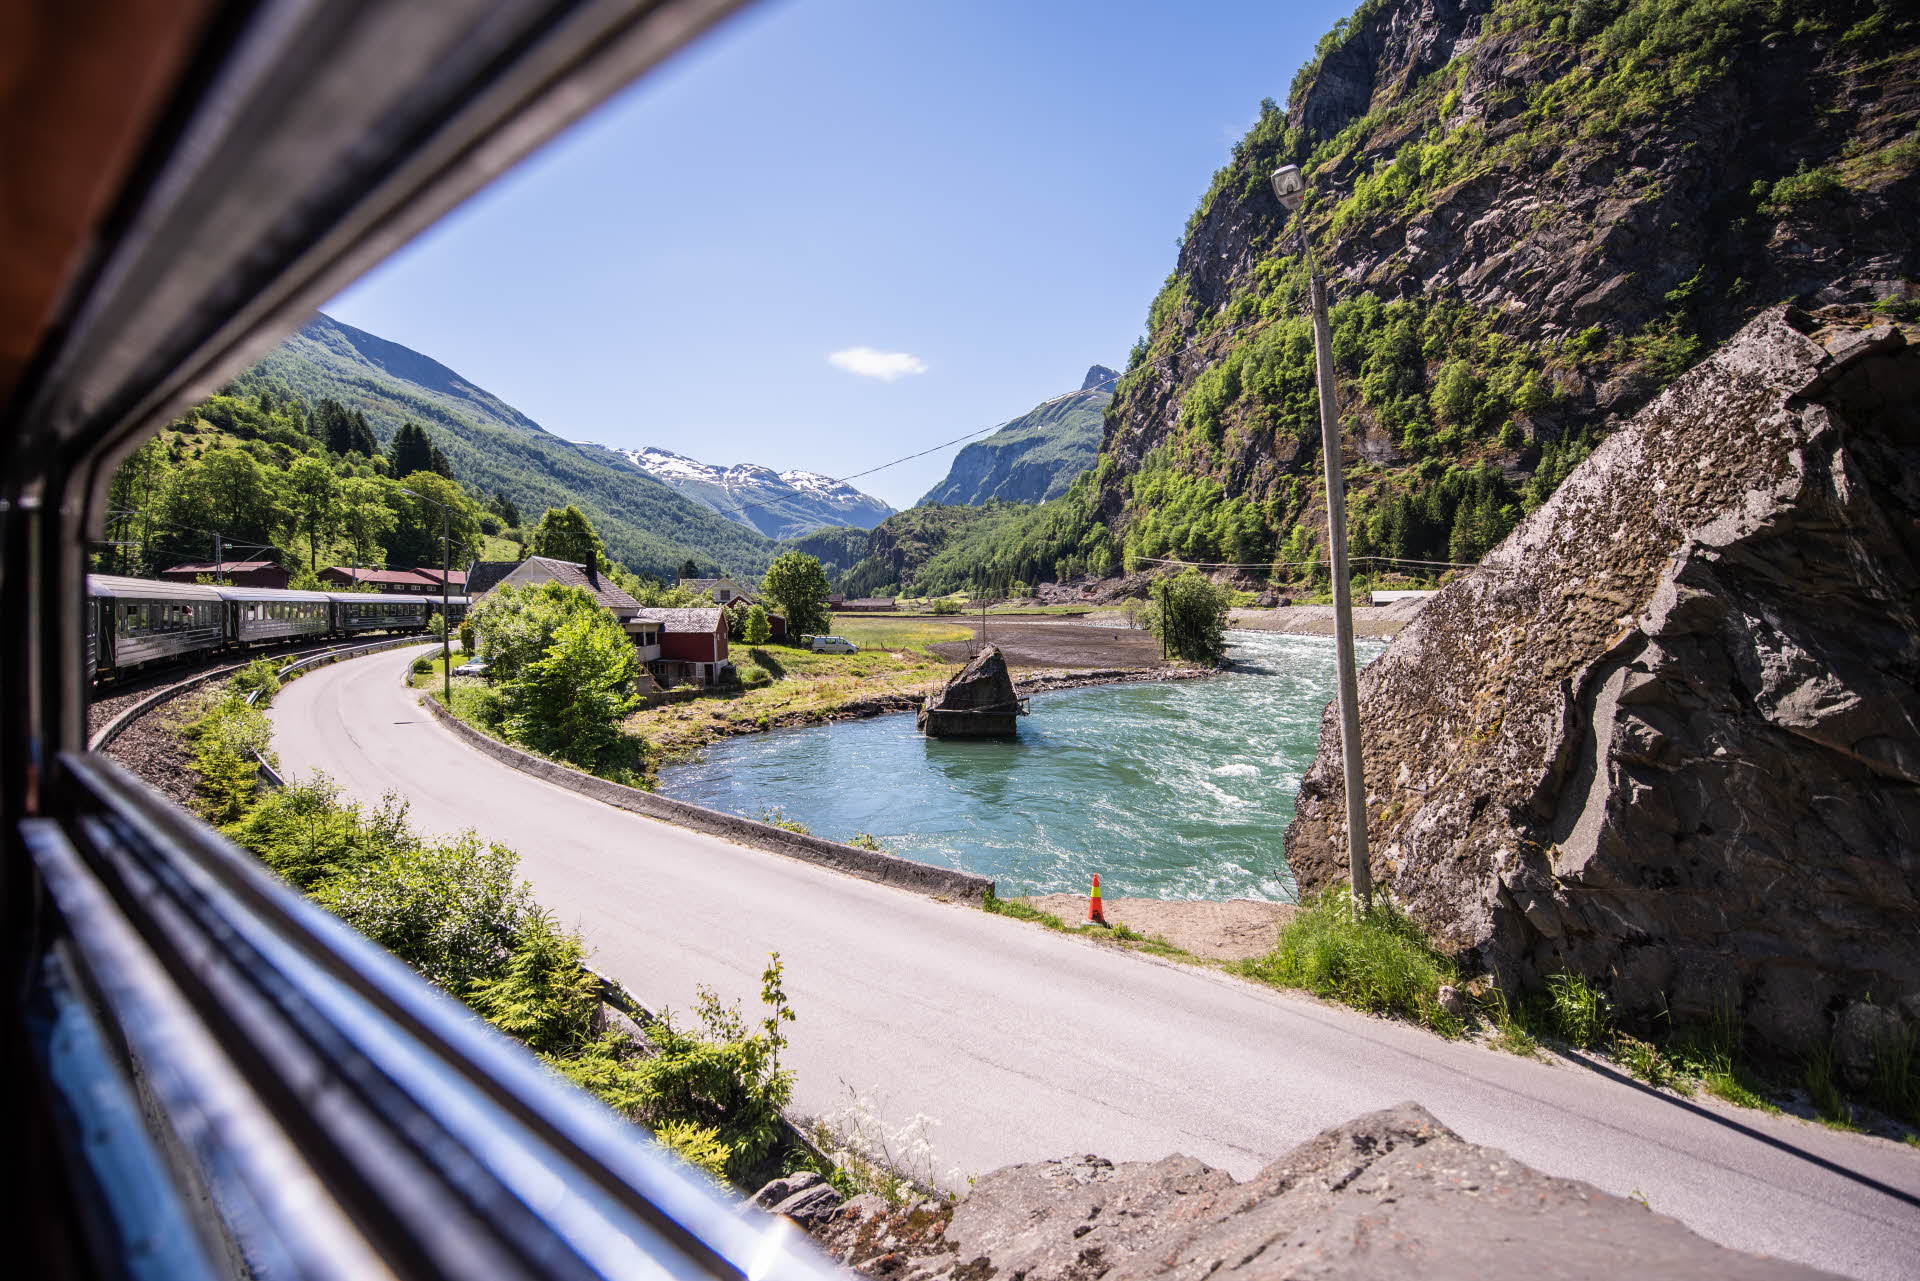 View from open window inside The Flam Railway coach in summer passing river and roads in Flam valley